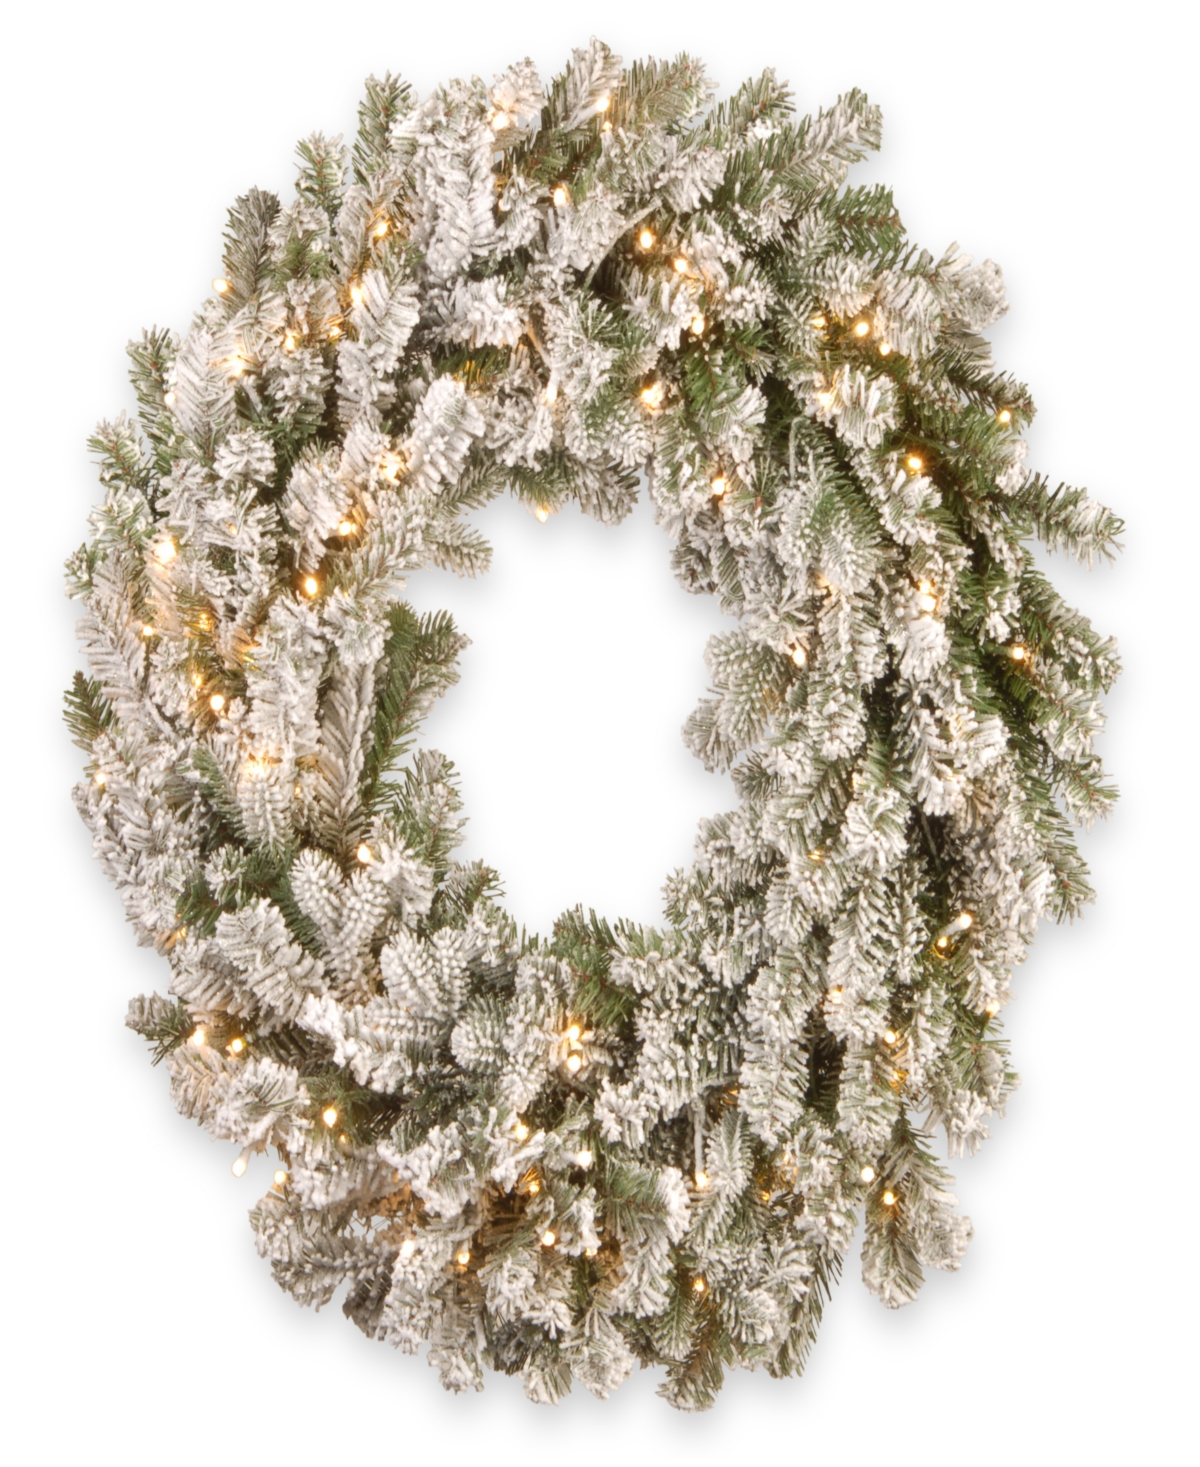 National Tree Company 30" Snowy Sheffield Spruce Wreath With Twinkly Led Lights In Green